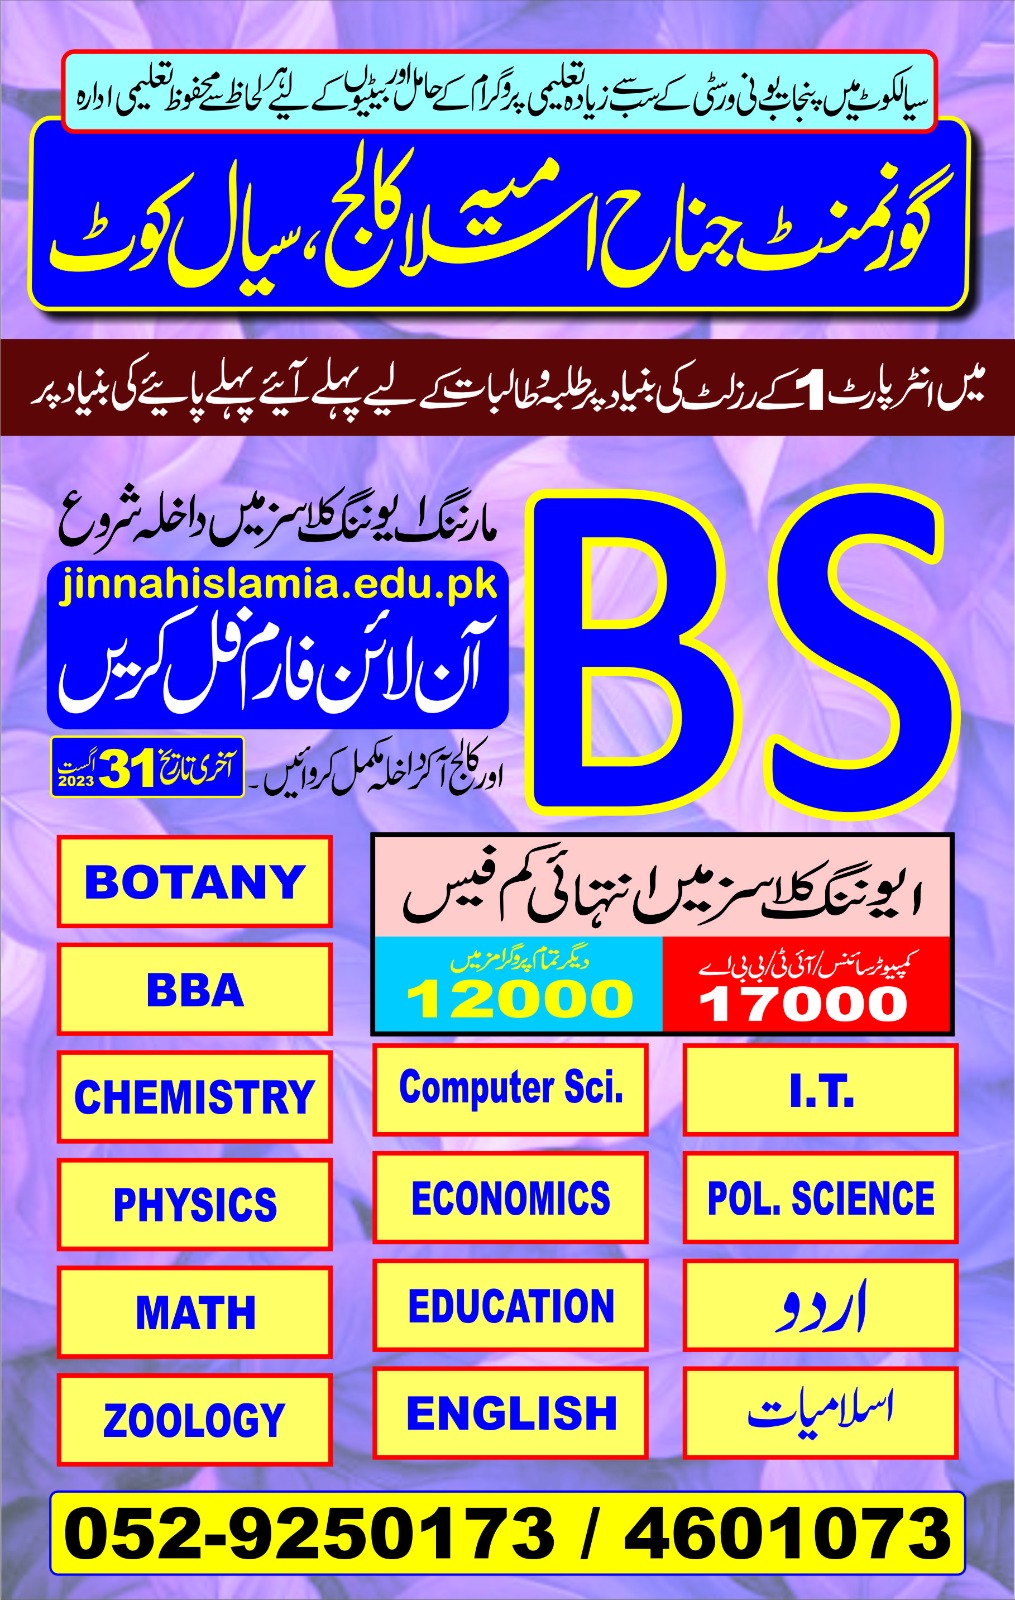 BS admissions ad